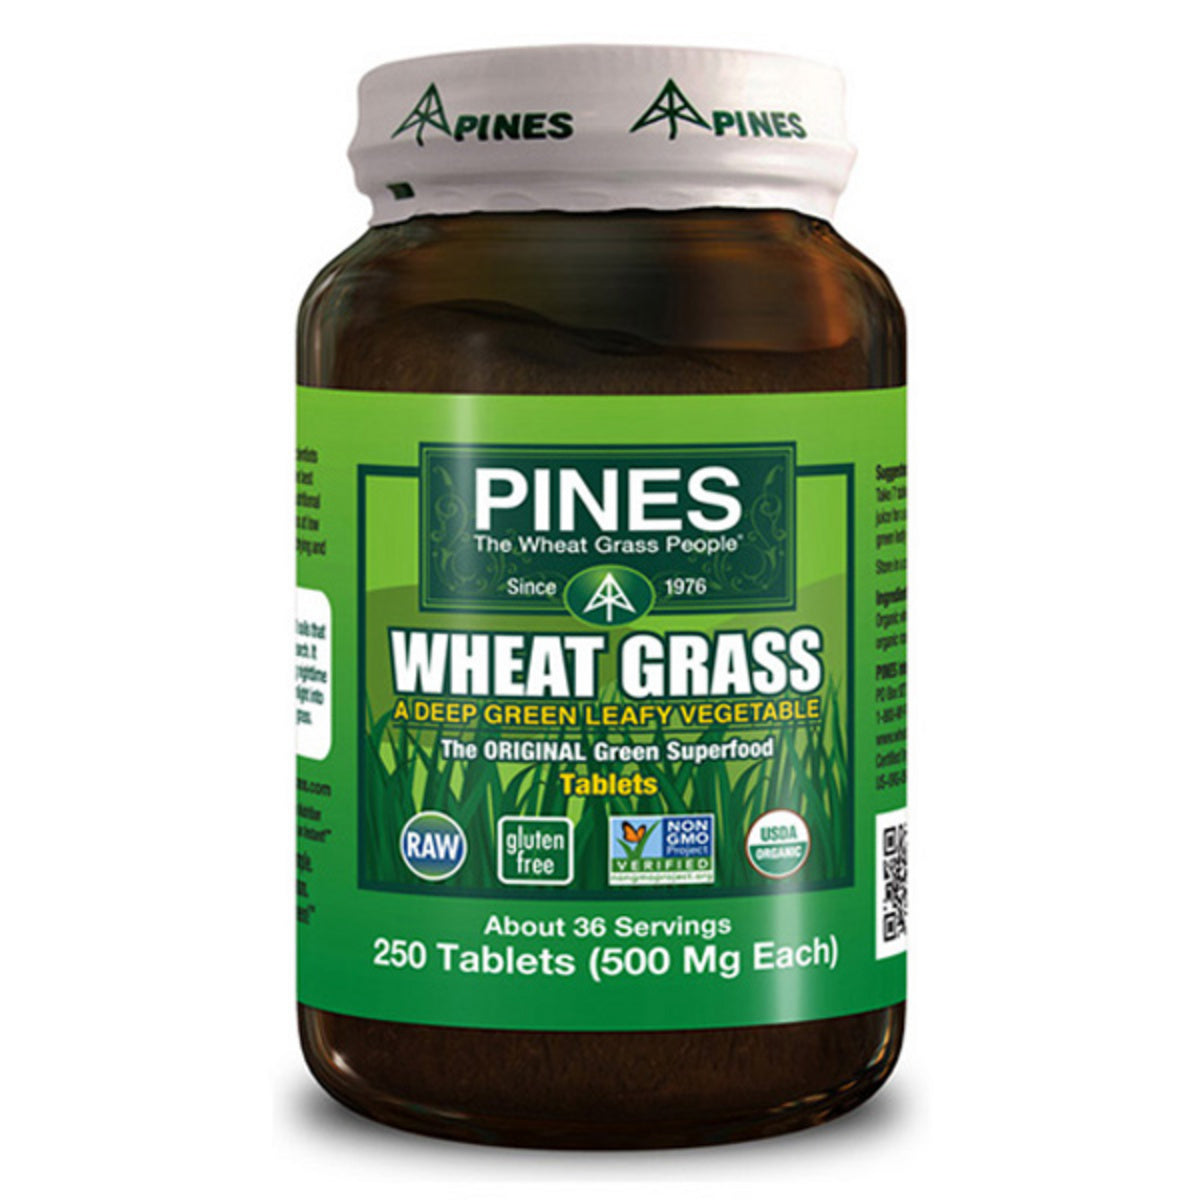 Primary image of Wheat Grass 500mg tabs